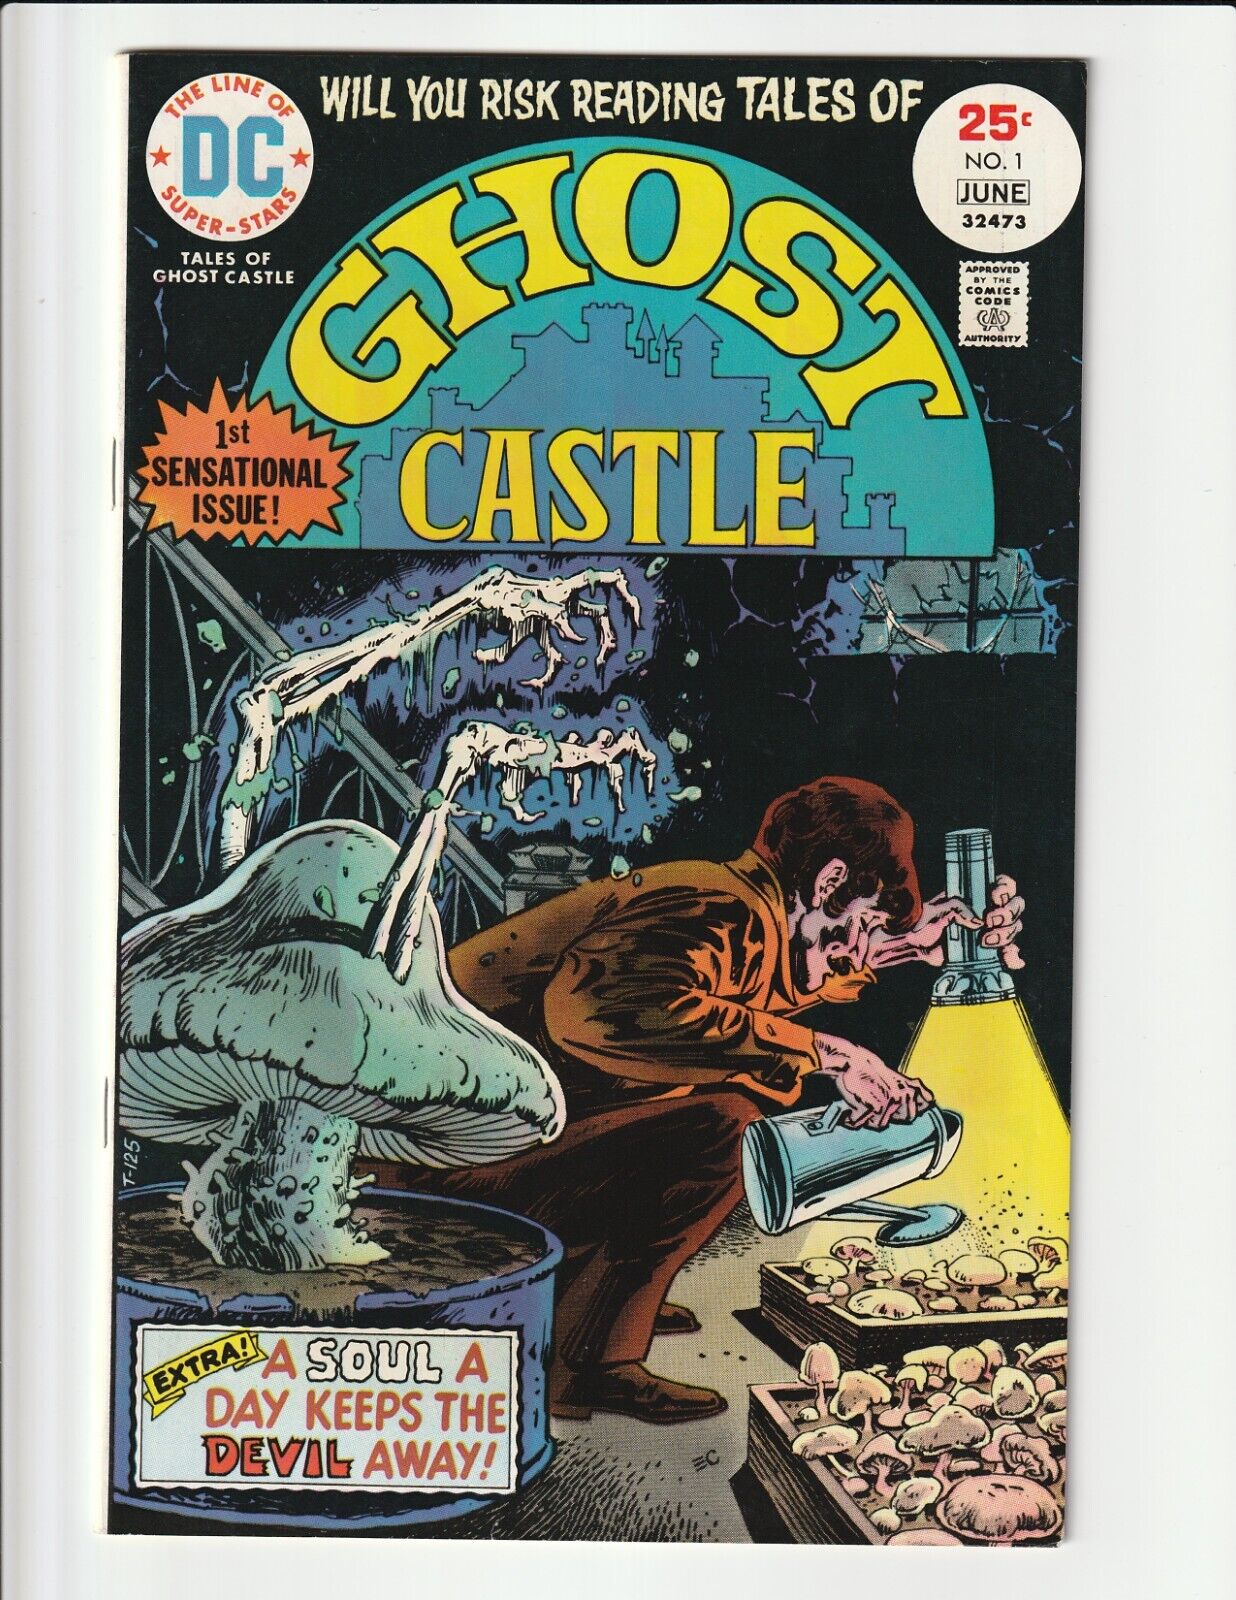 TALES OF GHOST CASTLE #1 VF+ 8.5 FIRST APPEARANCE OF LUCIEN THE LIBRARIAN DC